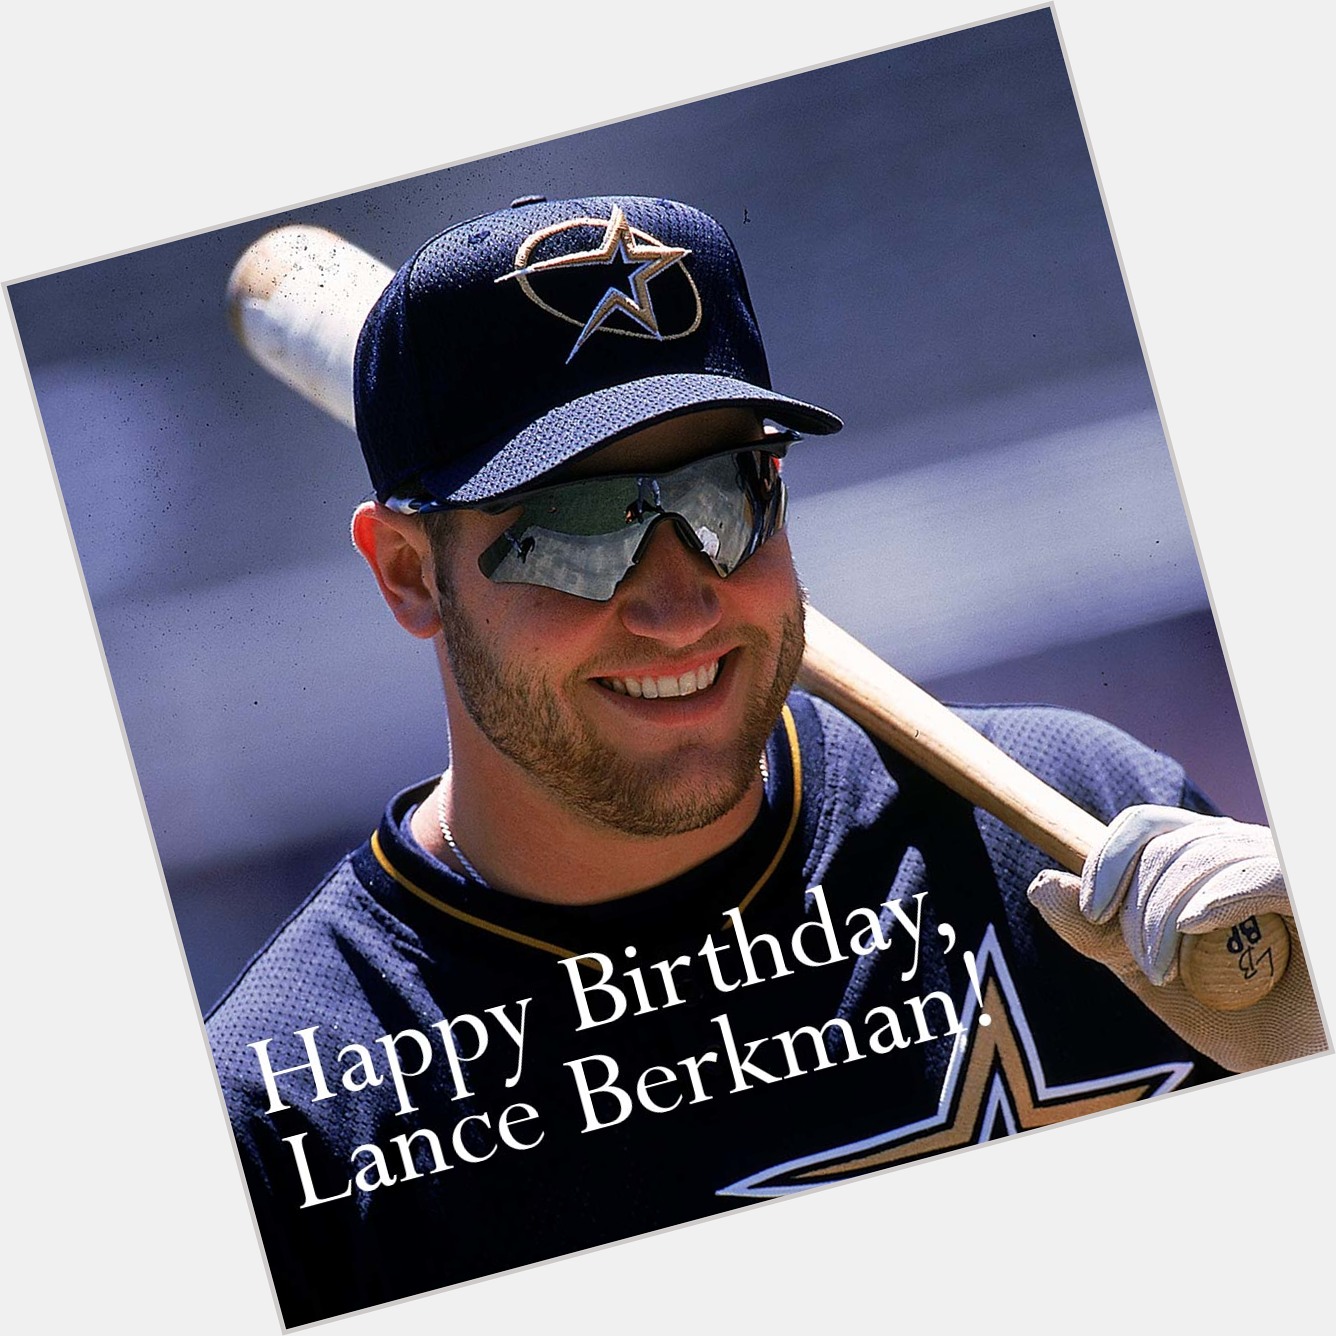 Happy Birthday, Lance Berkman! The former player is 42 today! 